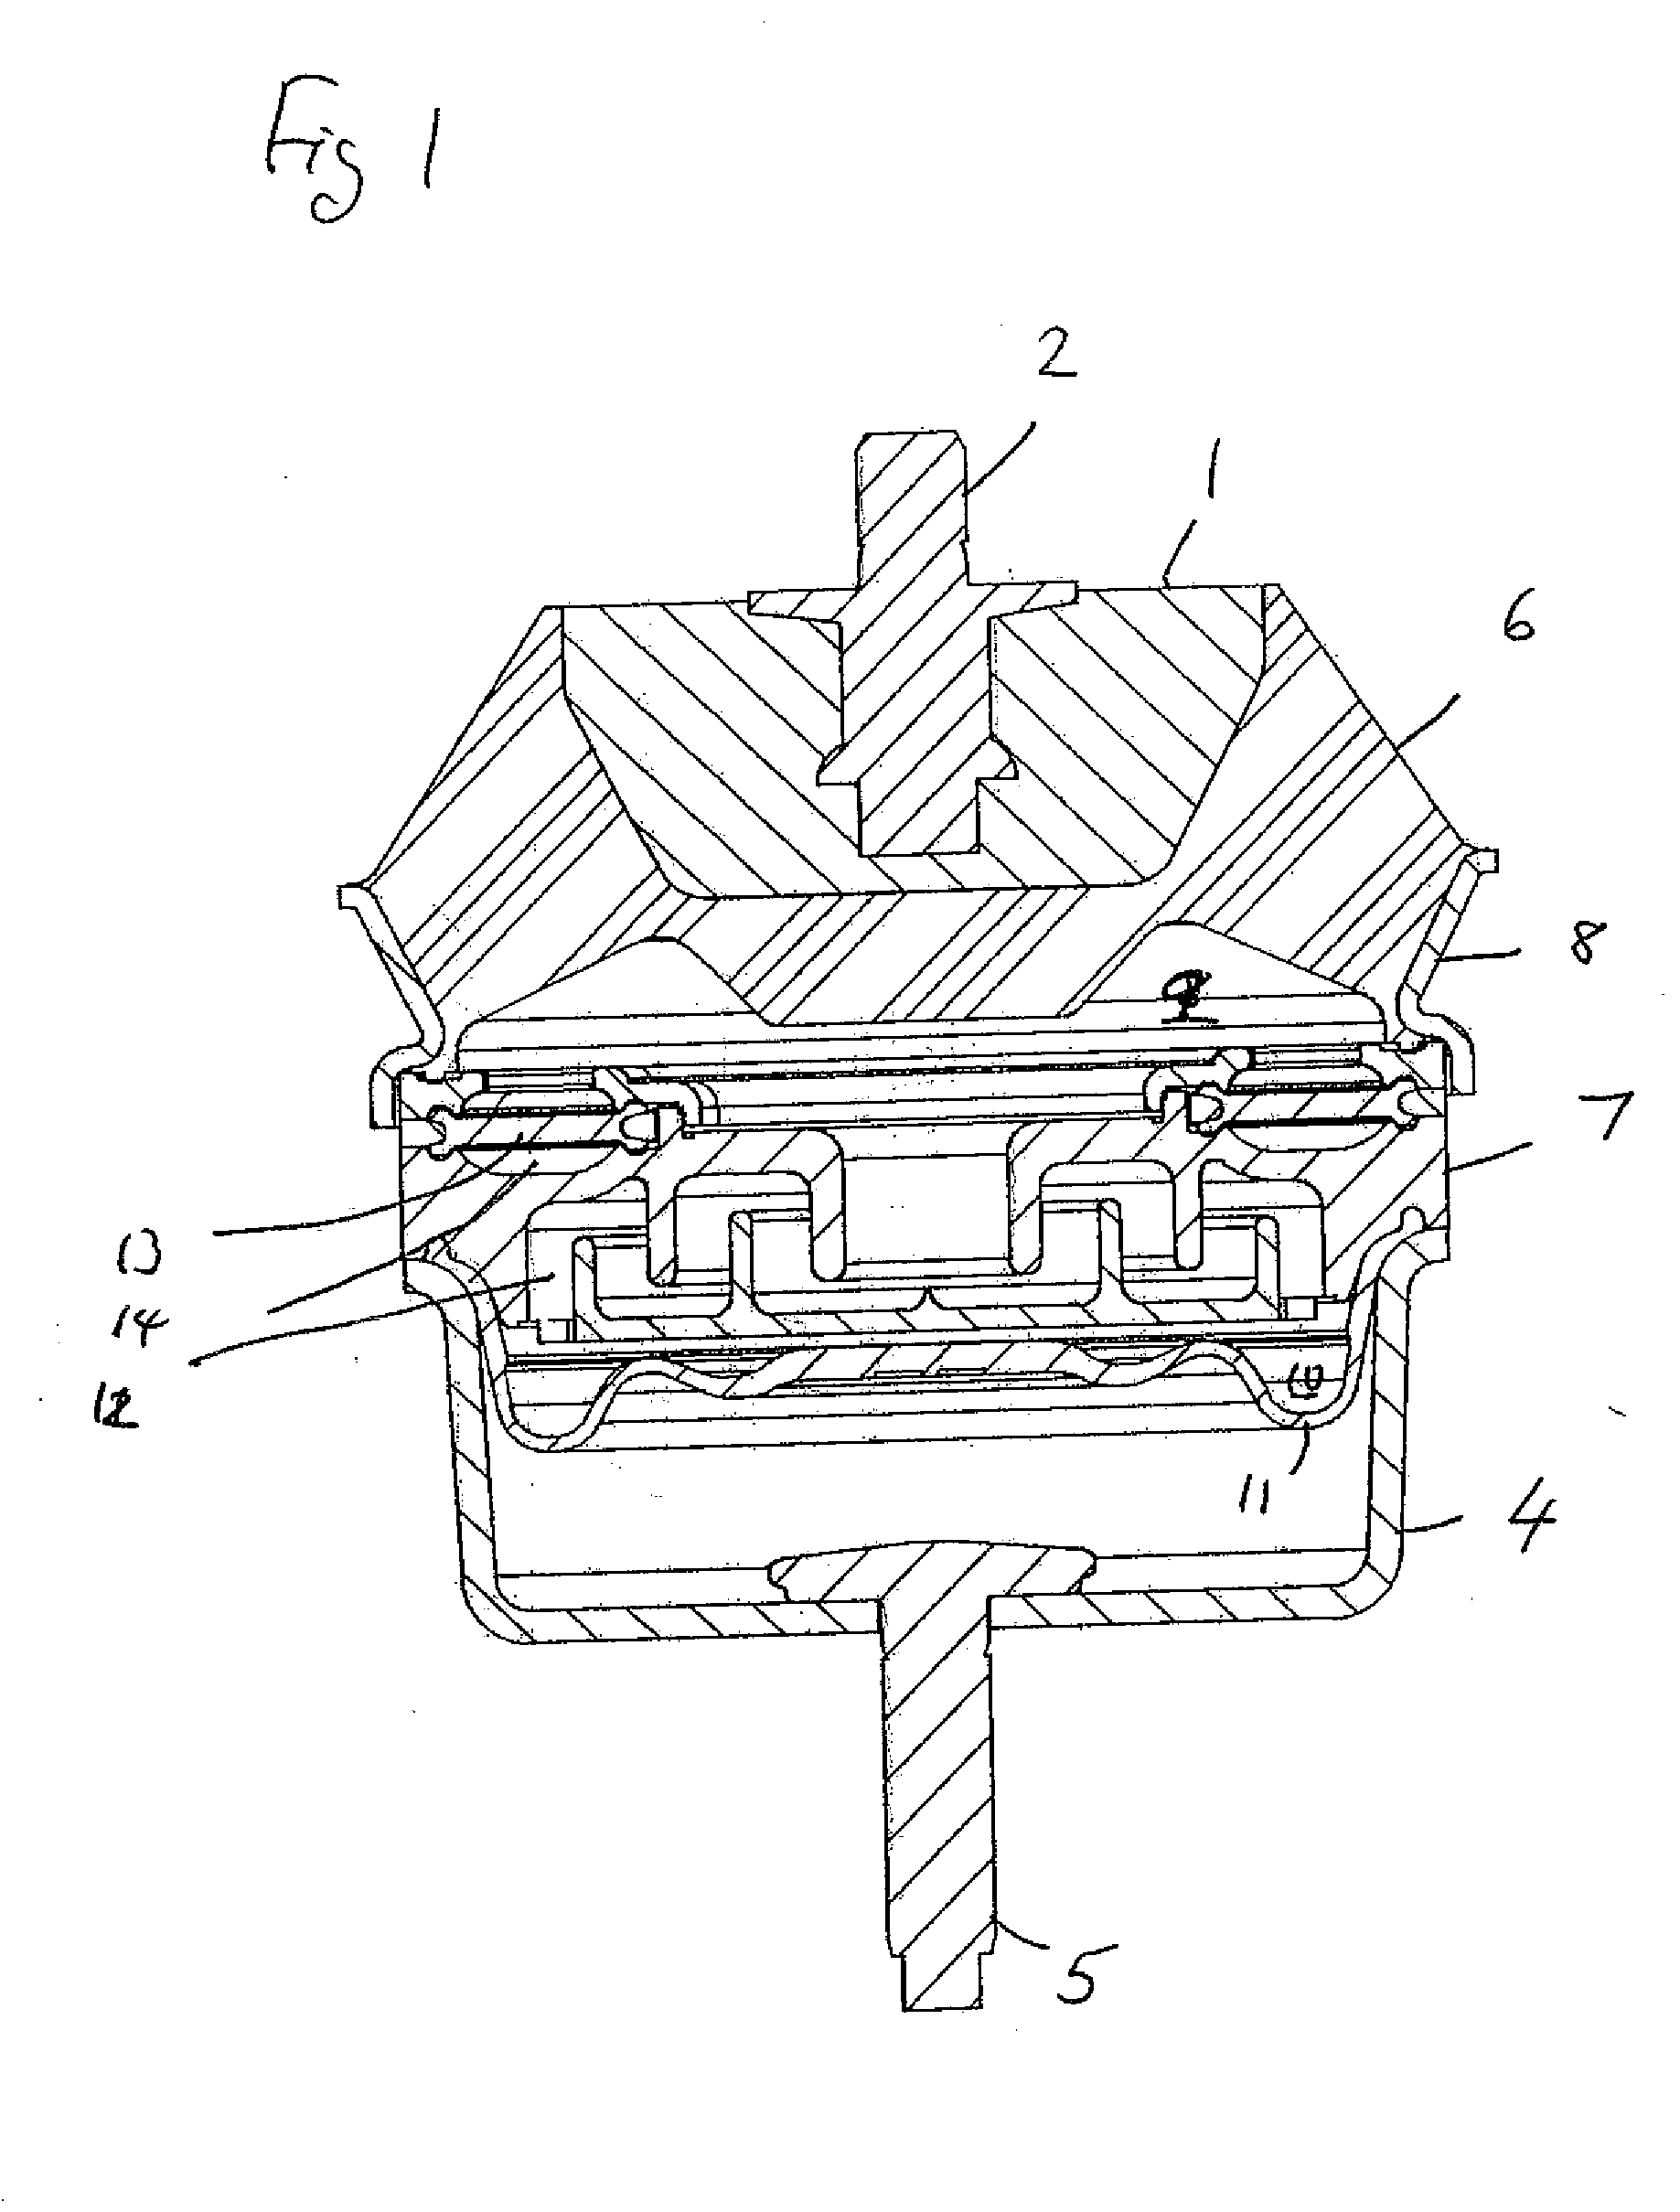 Hydraulically damped mounting device